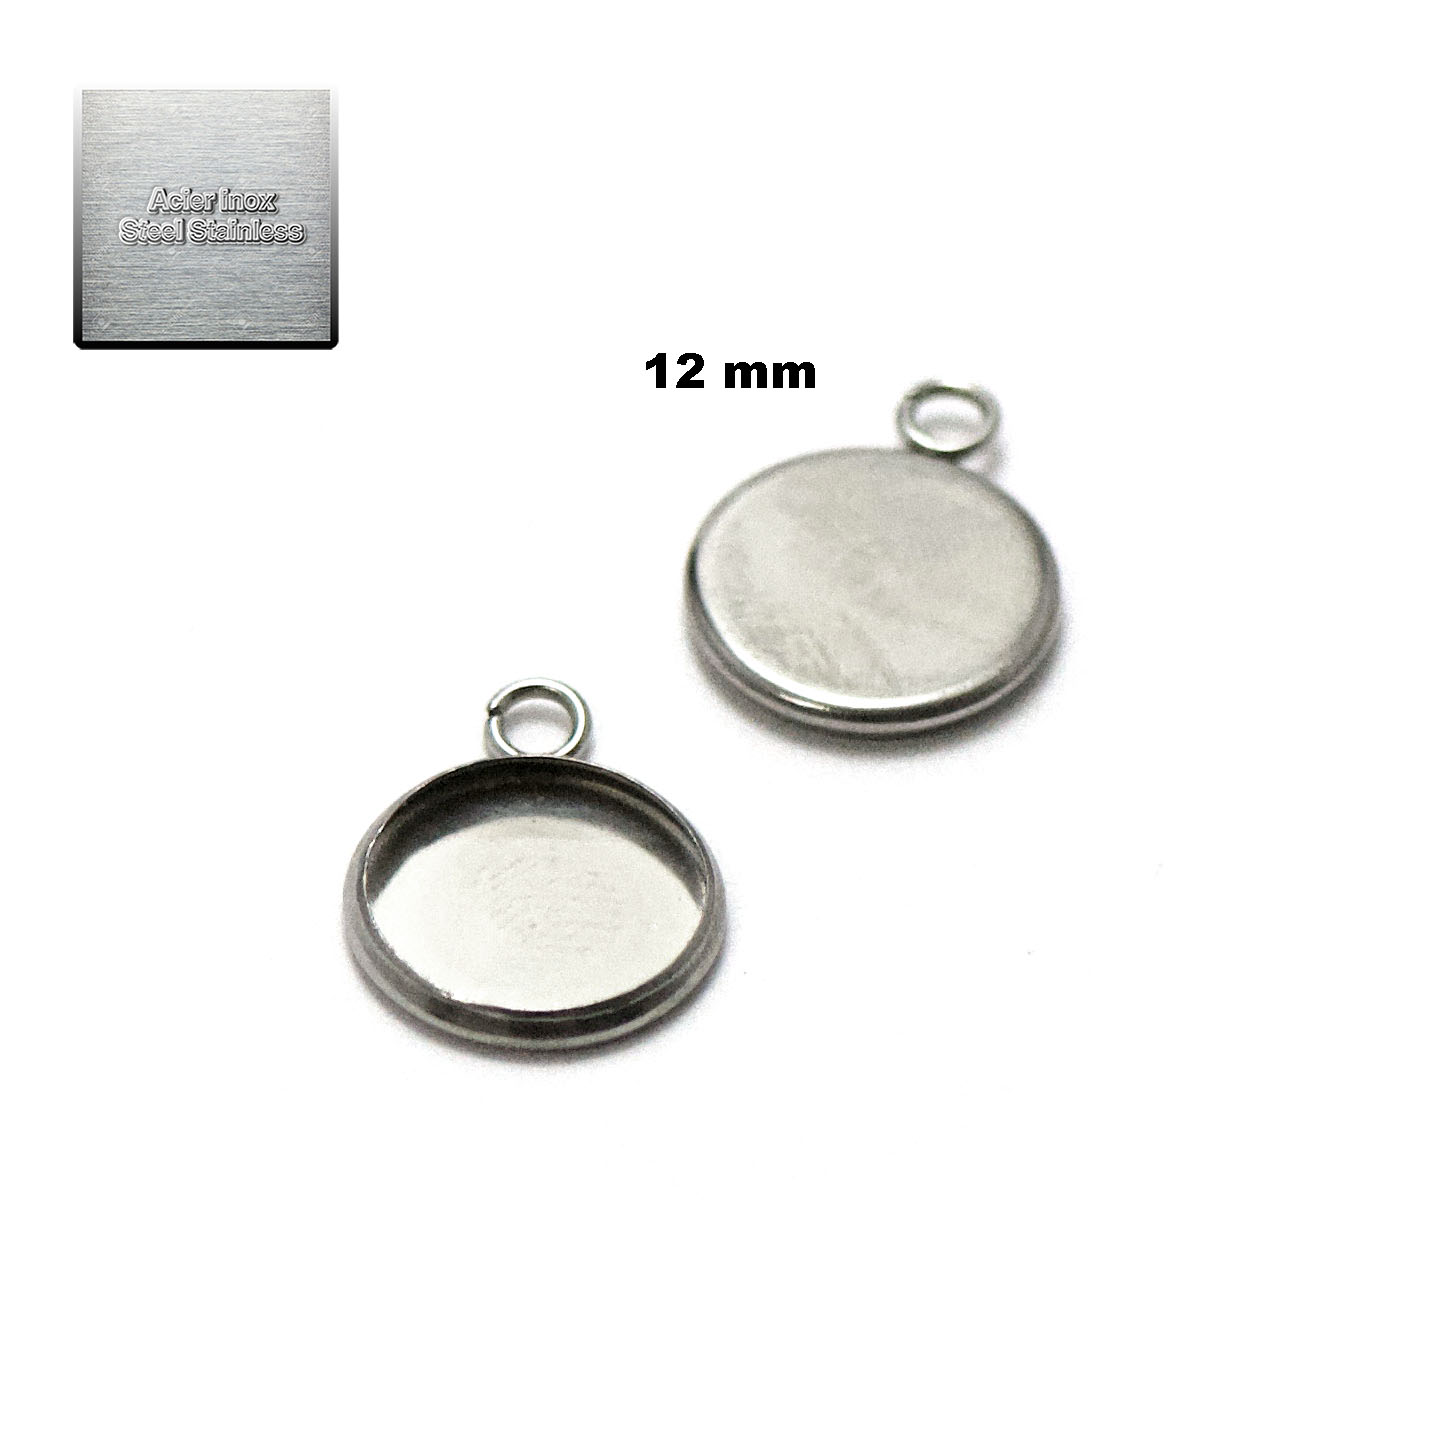 Acier inox: 10 pendentif support cabochon 12 mm, steel stainless